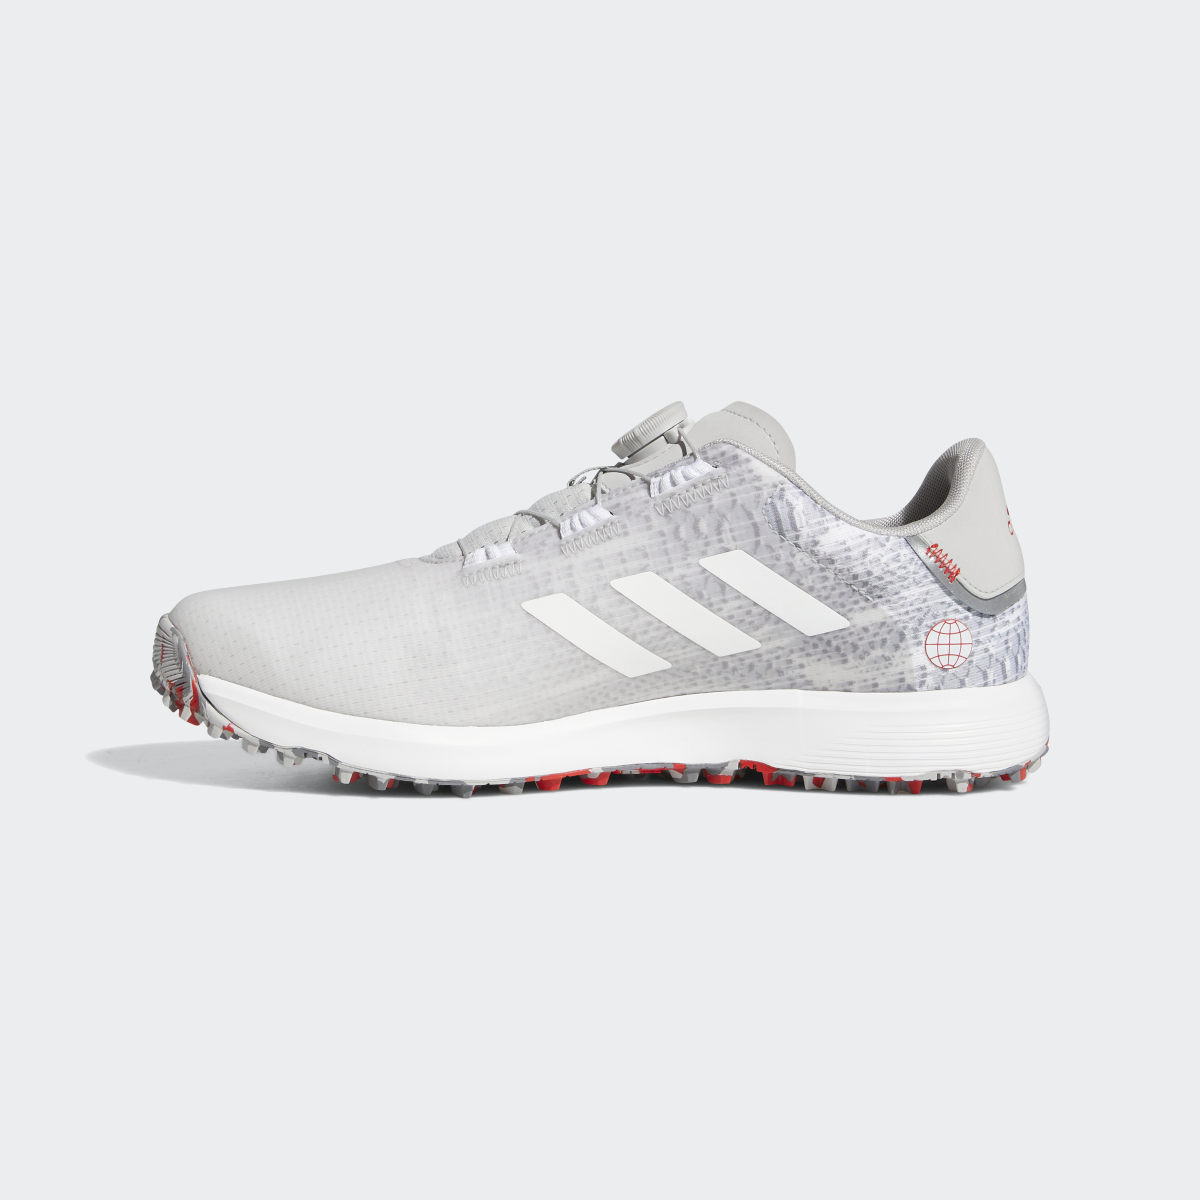 Adidas S2G BOA Wide Spikeless Golf Shoes. 7